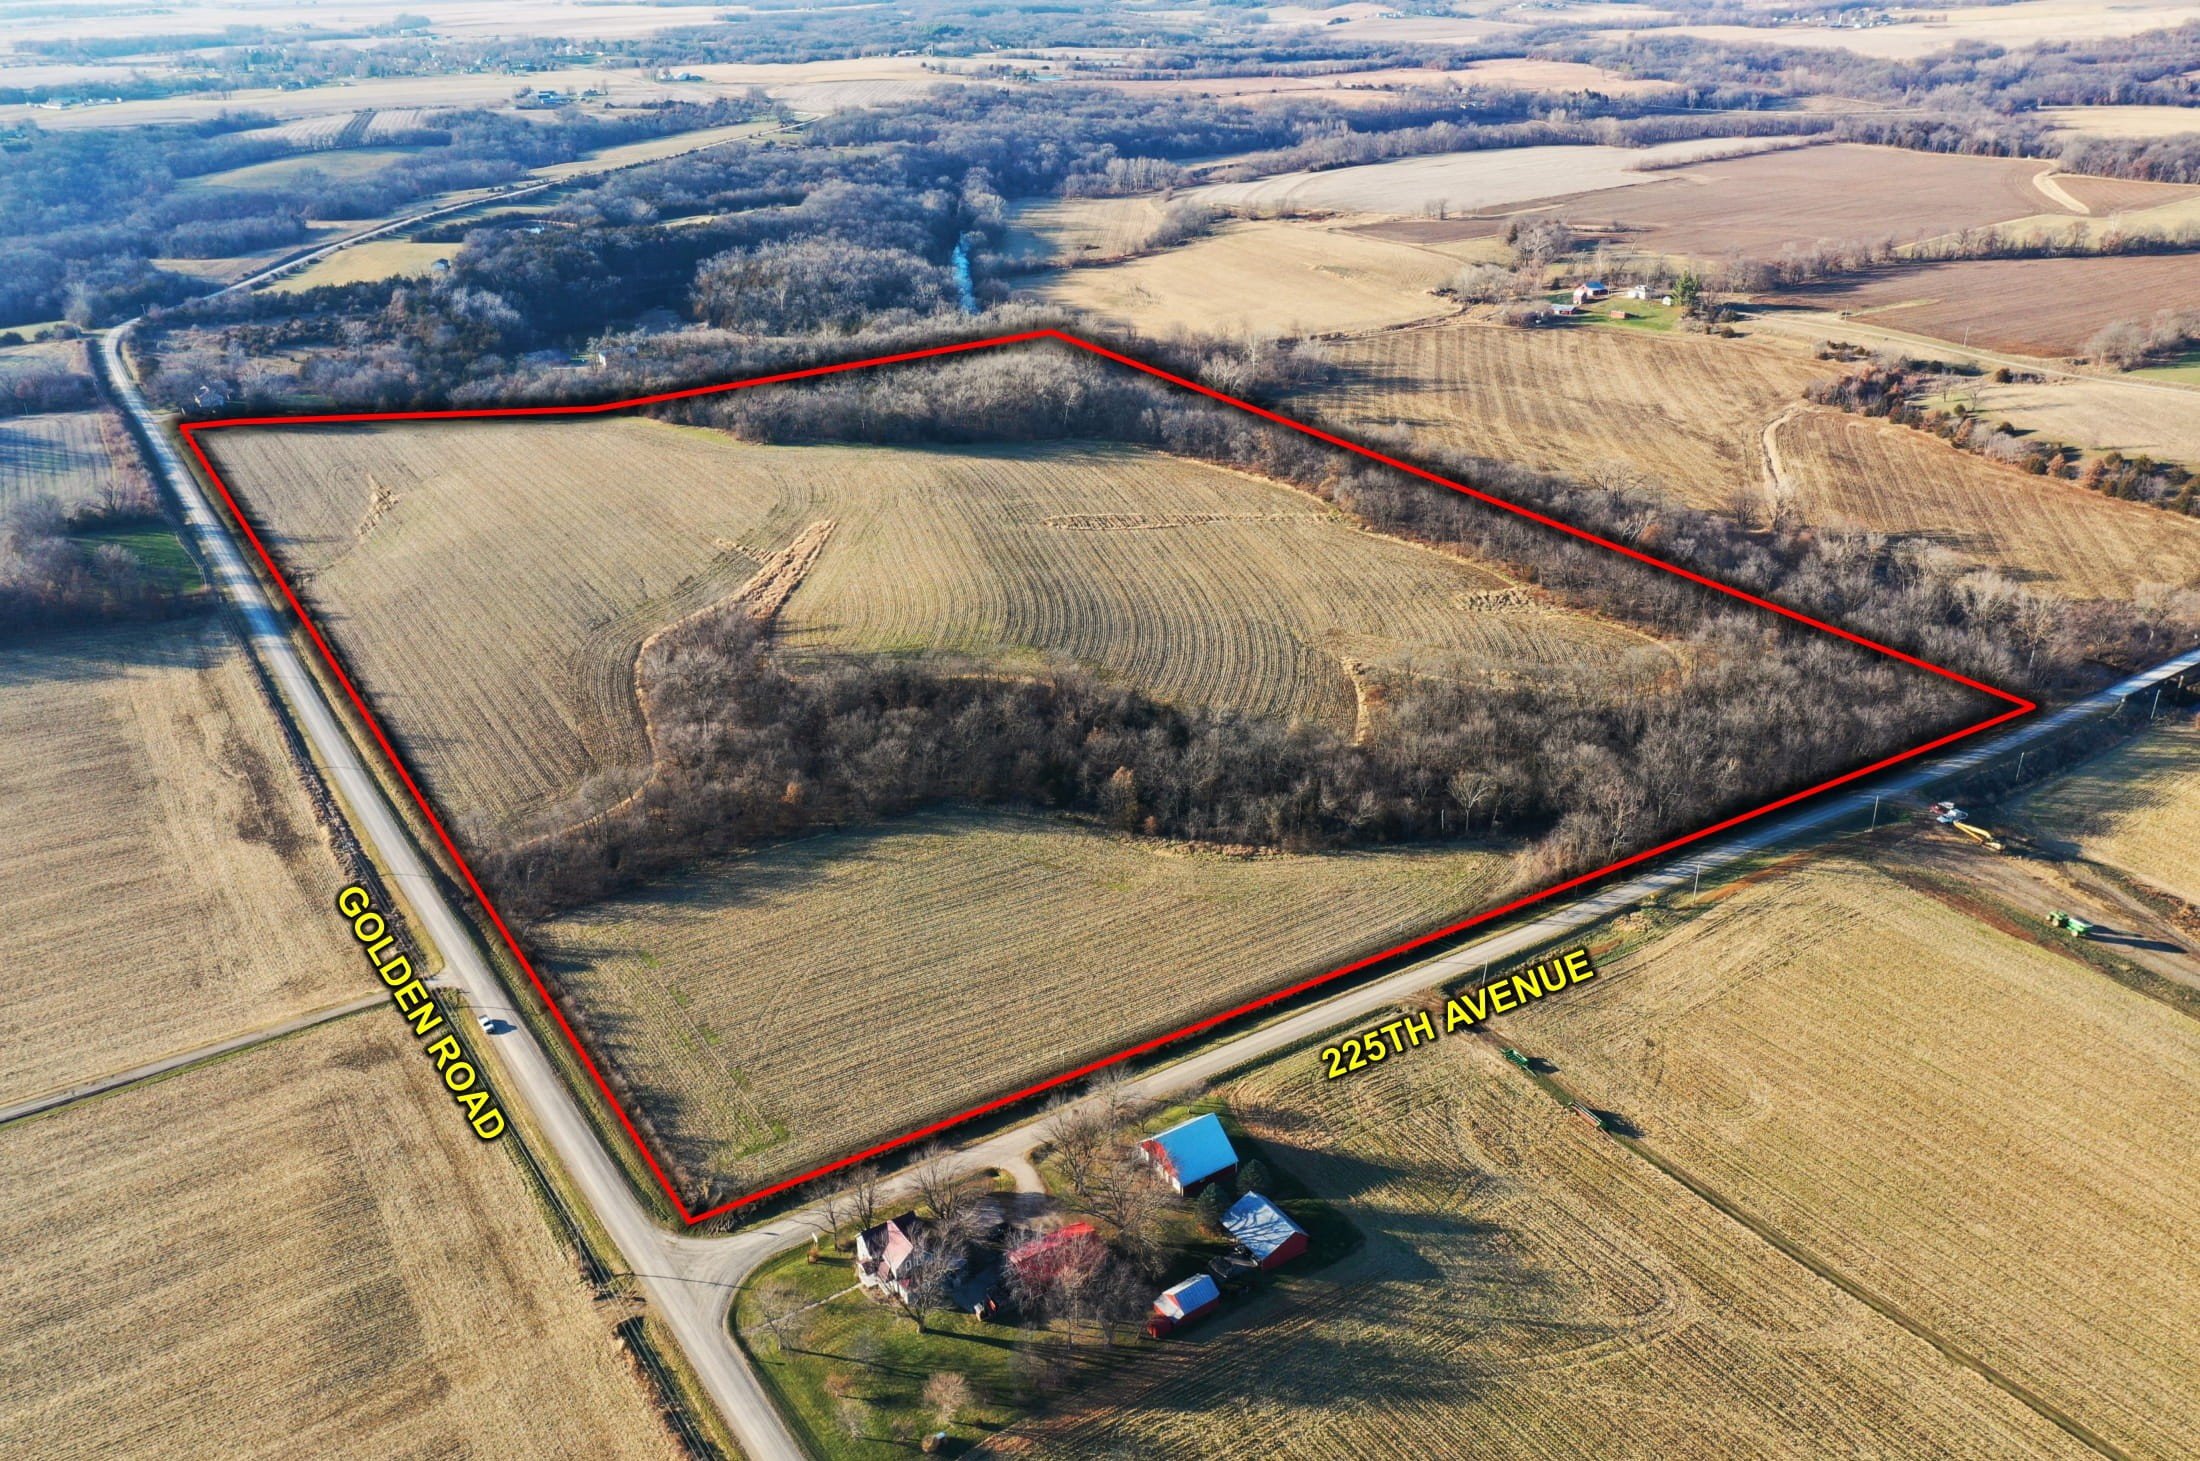 1-golden-road-225th-avenue-west-point-52656-Lee County, Iowa Land Auction Farms-02-9.jpg